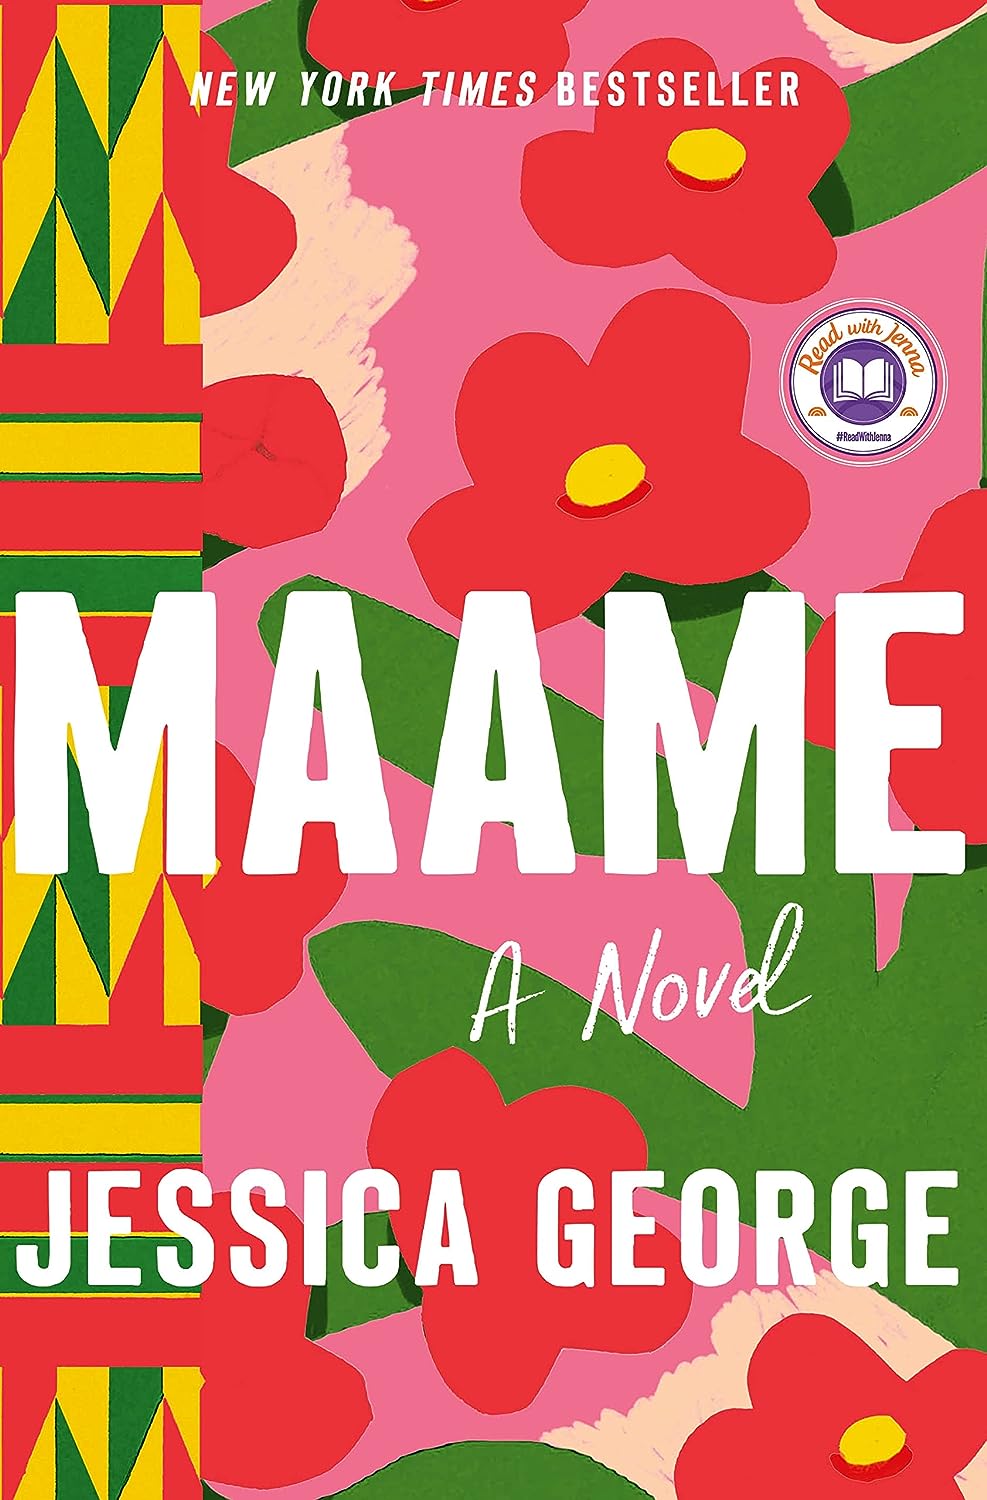 Image for "Maame: A Novel"